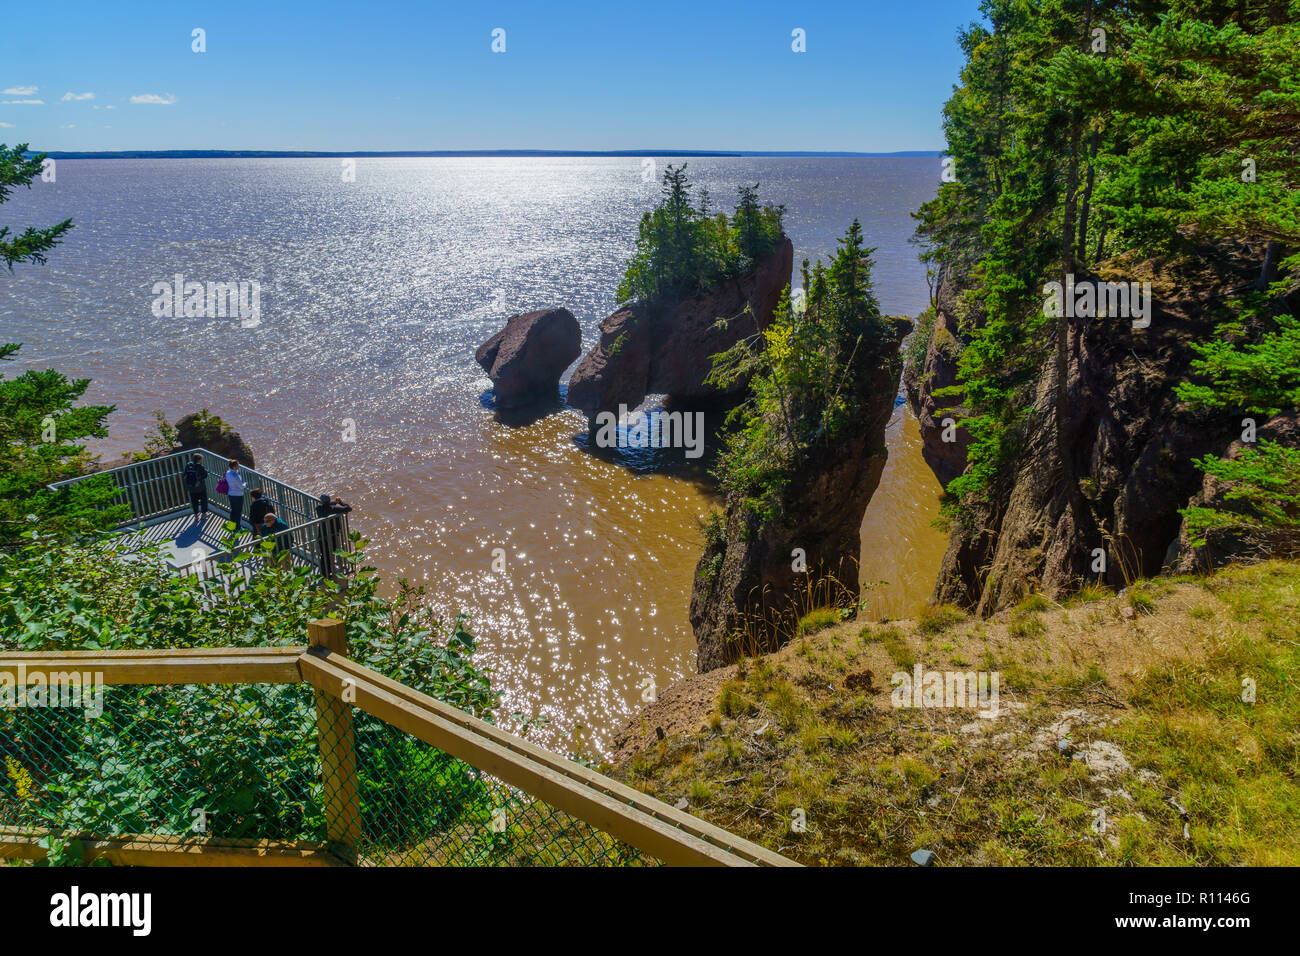 Hopewell Cape, Canada - September 24, 2018: View of Hopewell Rocks at high tide, with visitors. New Brunswick, Canada Stock Photo